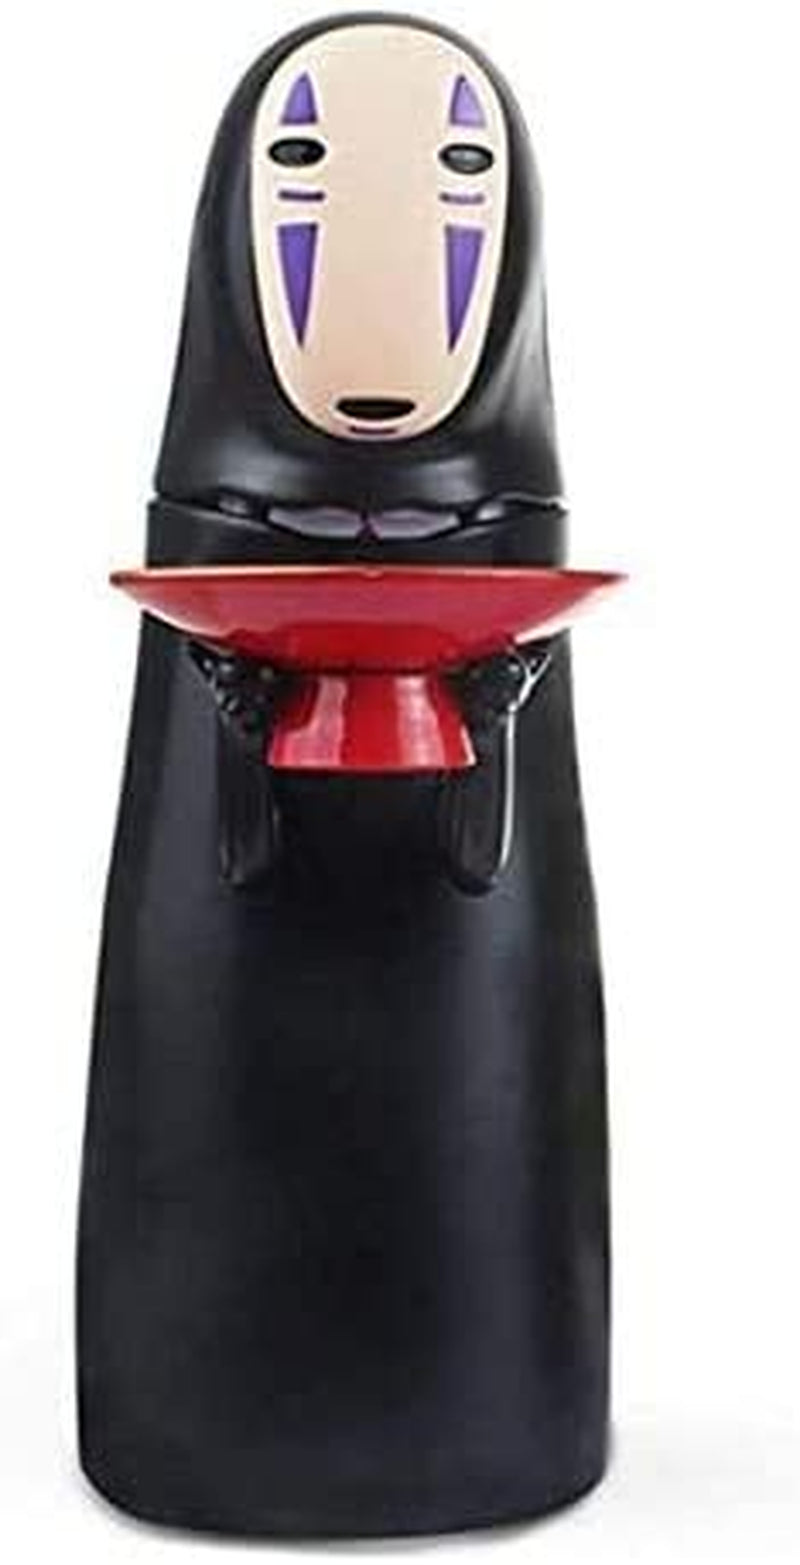 Toy Banks,No Face Man Coin Bank Auto Eat Coin Music Piggy Bank, Adults Boys Kids Birthday Gifts Gift Table Decoration